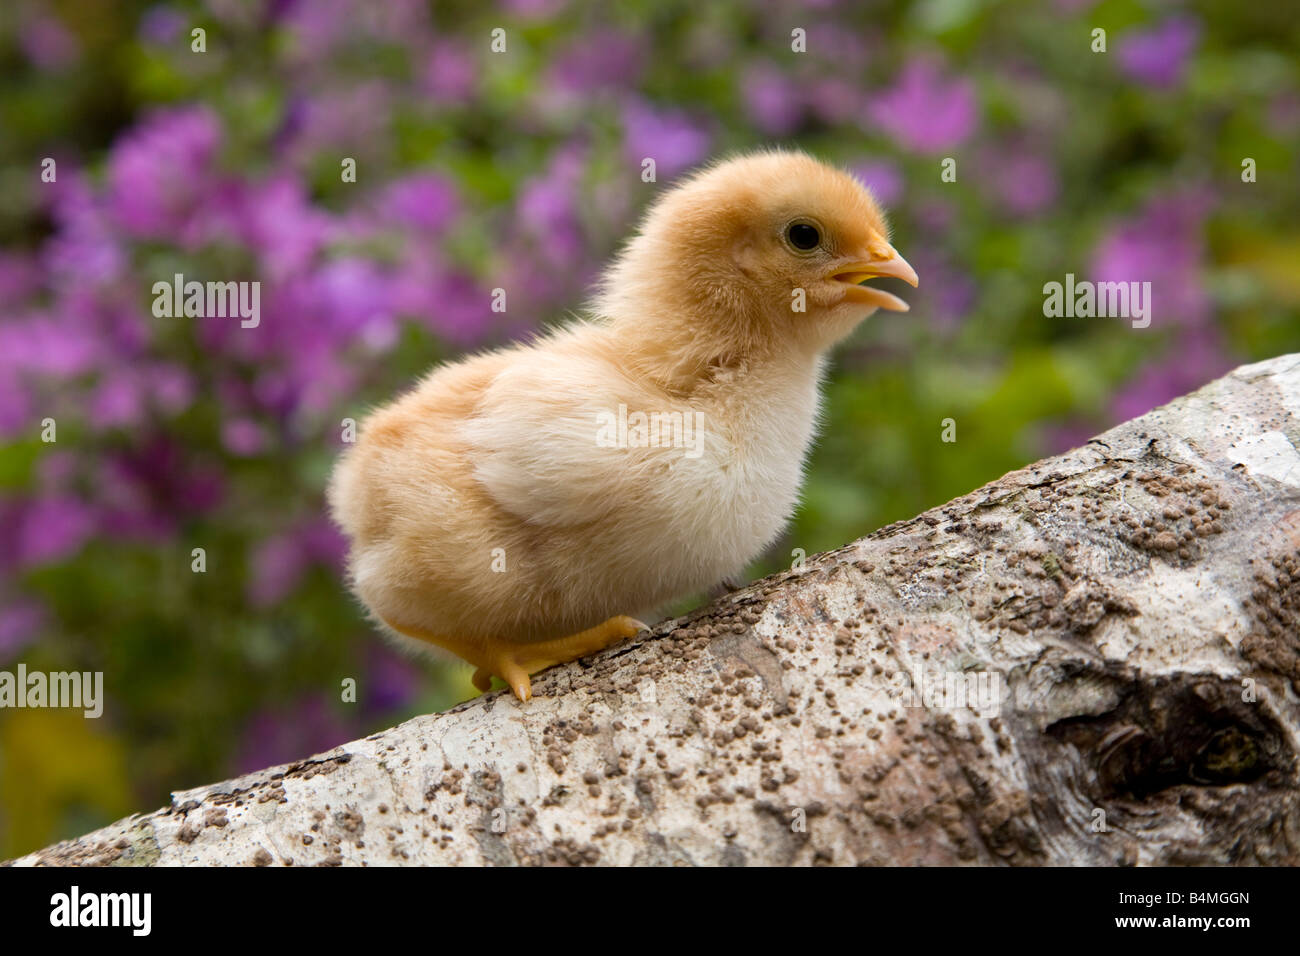 chick on a log in a garden Stock Photo